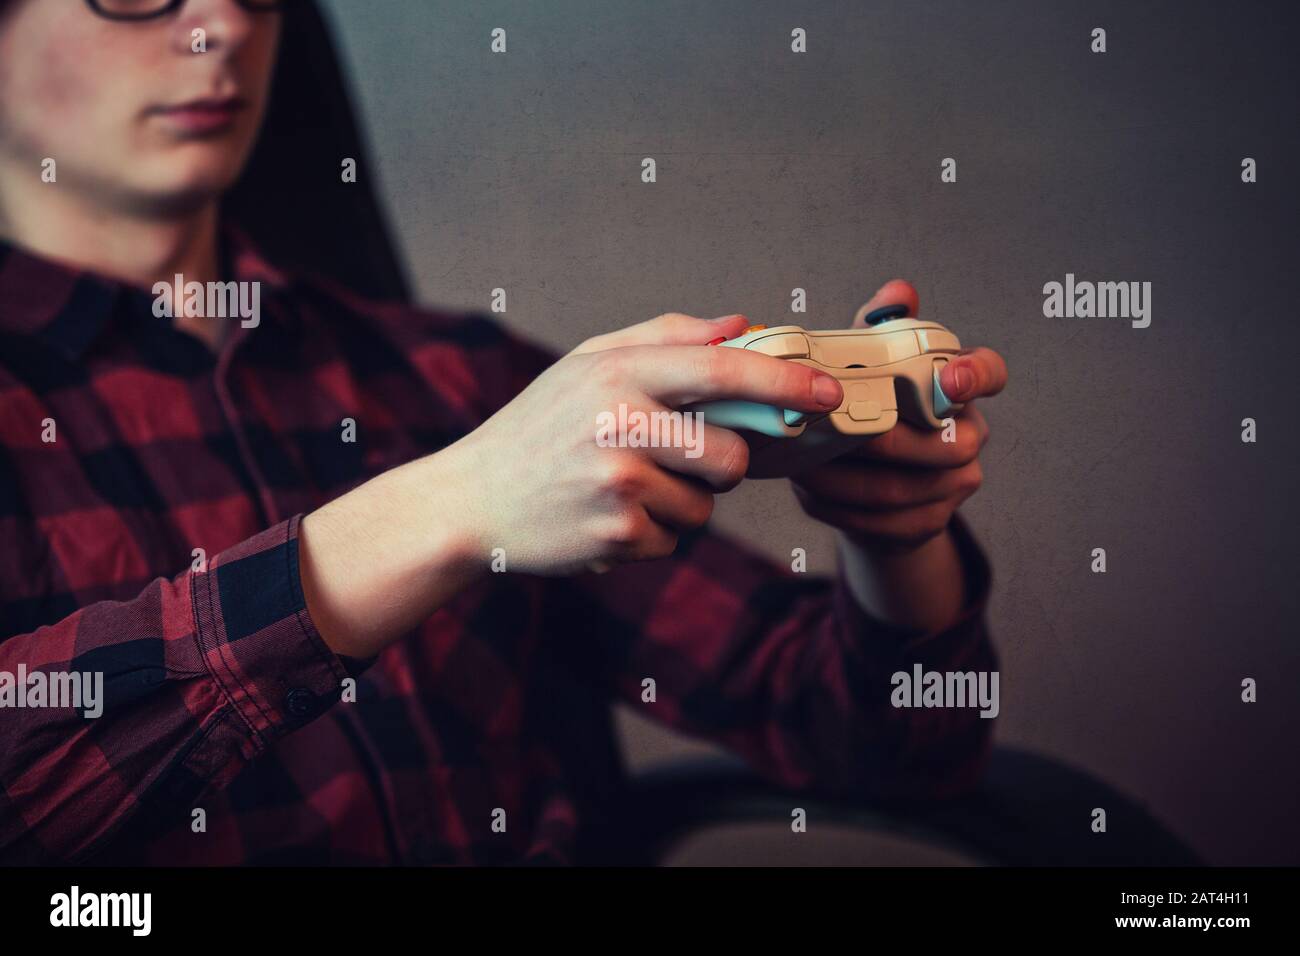 Close up of teenage boy hands playing video games holding a joystick console, seated relaxed in his room. Focused guy having fun in the virtual world. Stock Photo